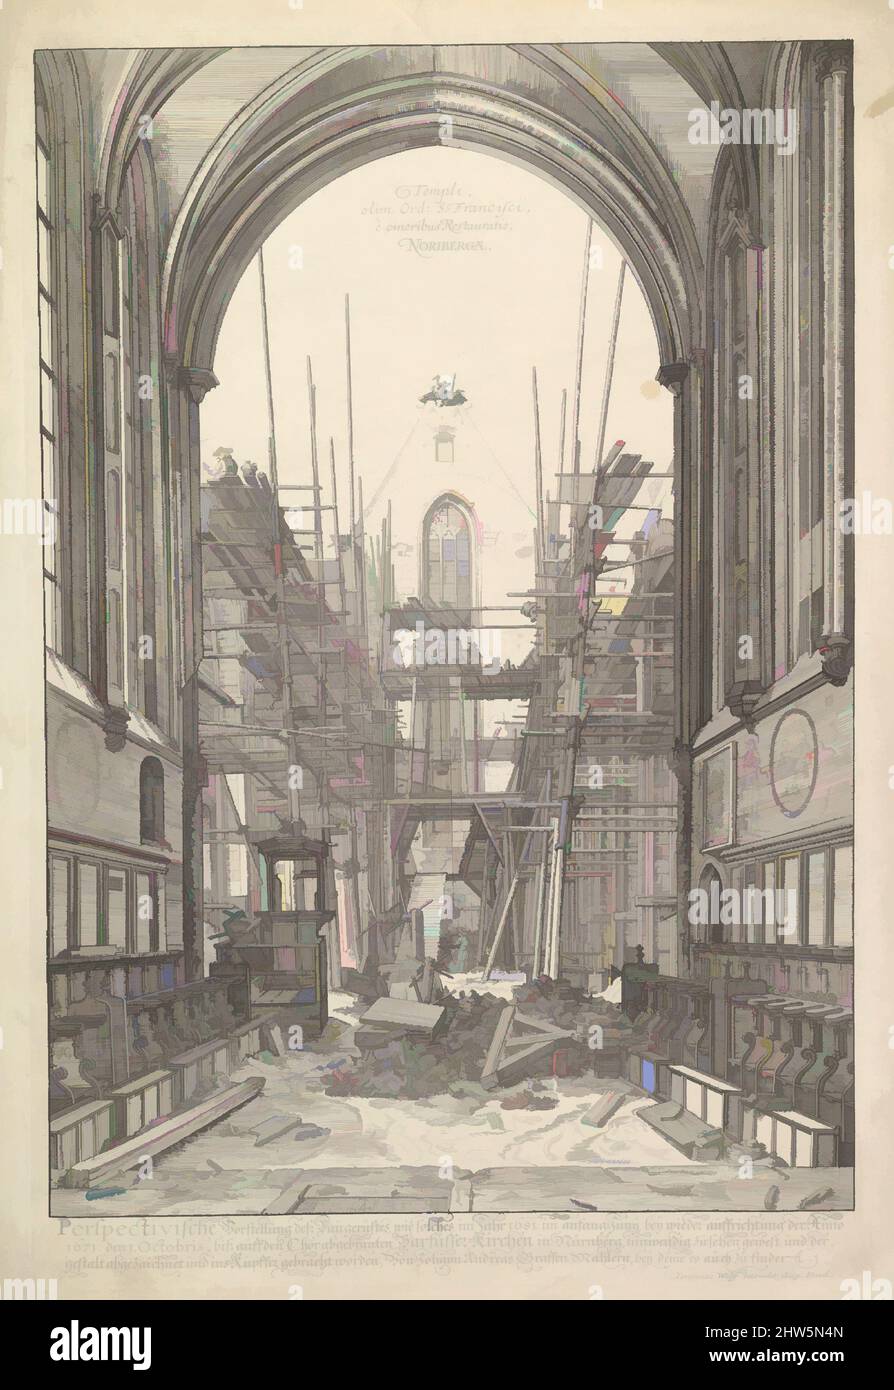 Art inspired by View of the Church of the Franciscans in Nuremberg under Reconstruction, from the series Views of Nuremberg, n.d., Etching; third state, Prints, Johann Ulrich Kraus (German, 1655–1719), Designed by Johann Andreas Graff (German, 1637–1701, Classic works modernized by Artotop with a splash of modernity. Shapes, color and value, eye-catching visual impact on art. Emotions through freedom of artworks in a contemporary way. A timeless message pursuing a wildly creative new direction. Artists turning to the digital medium and creating the Artotop NFT Stock Photo